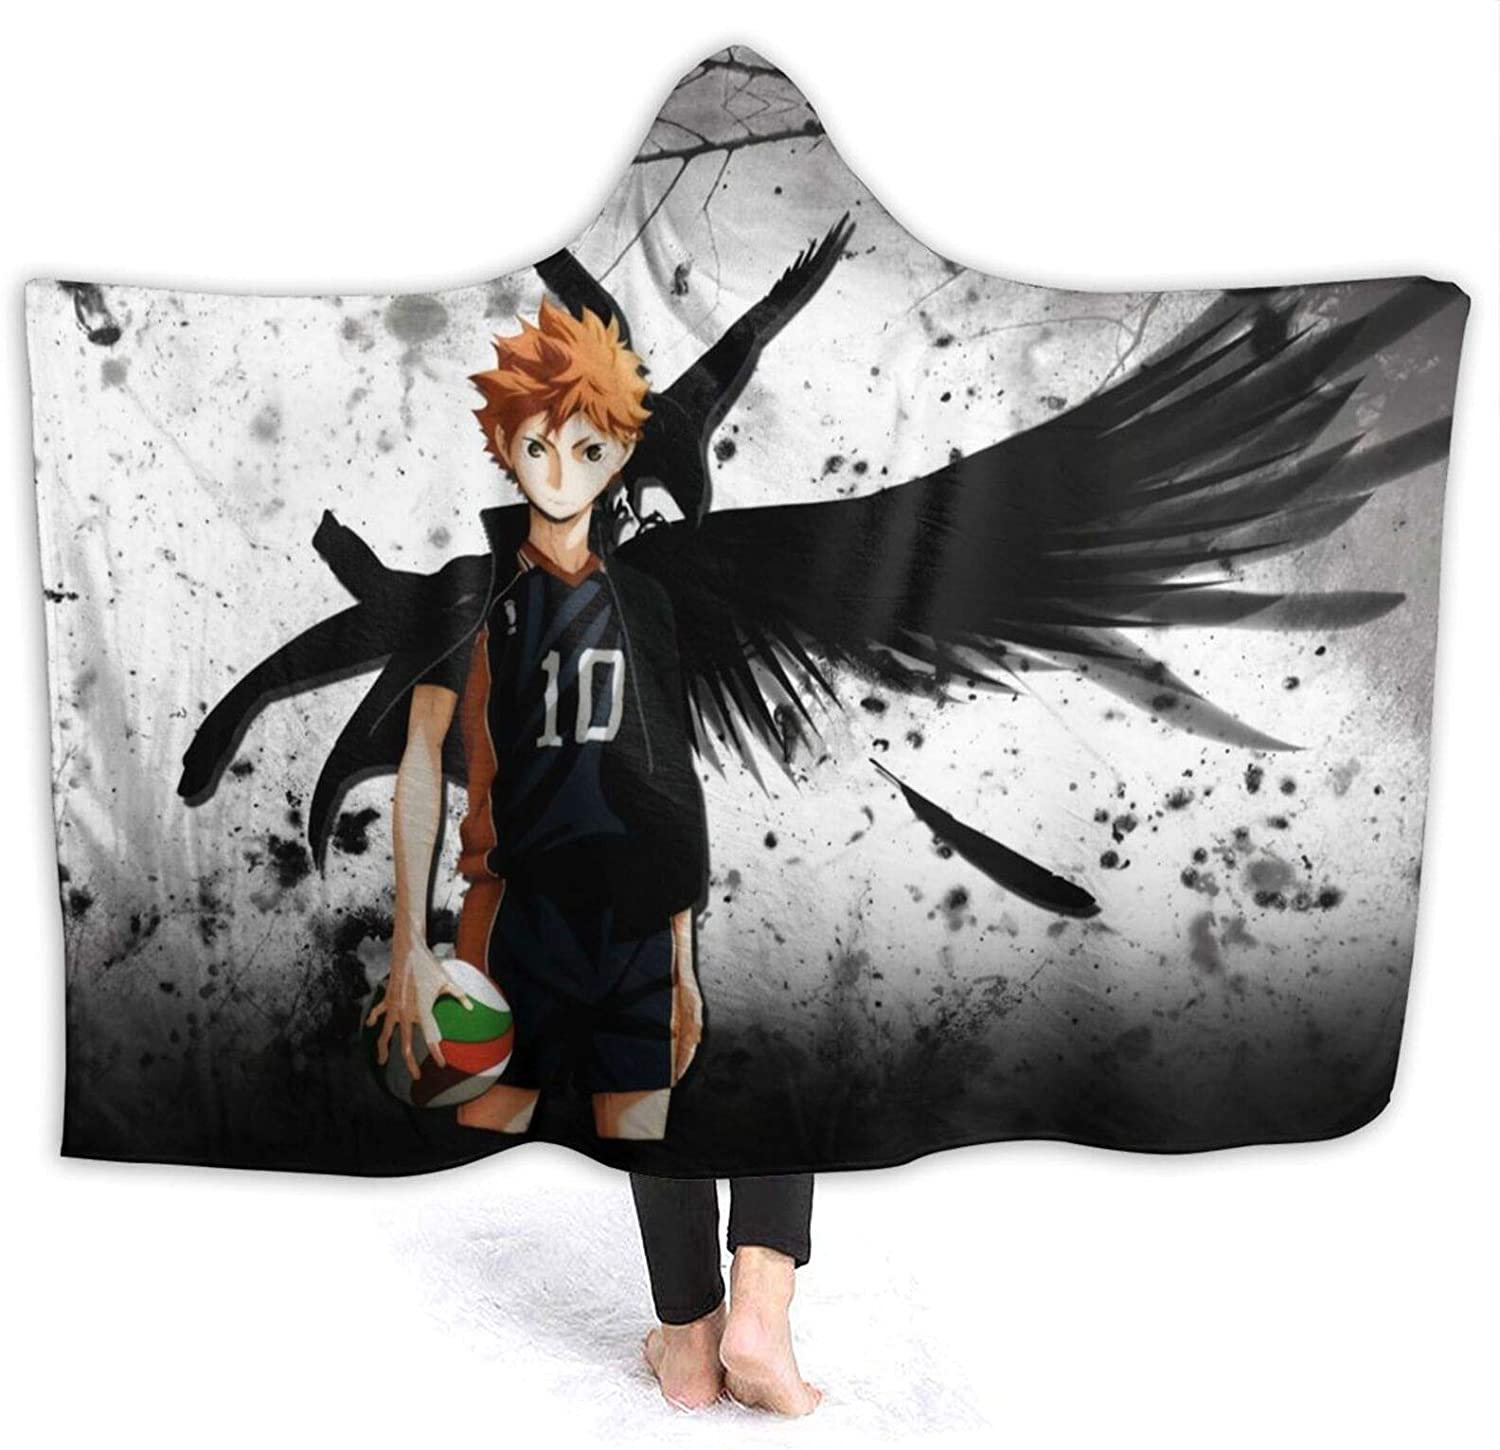 Flannel Hooded Blanket - Anime Haikyu! Passionate Volleyball Blankets